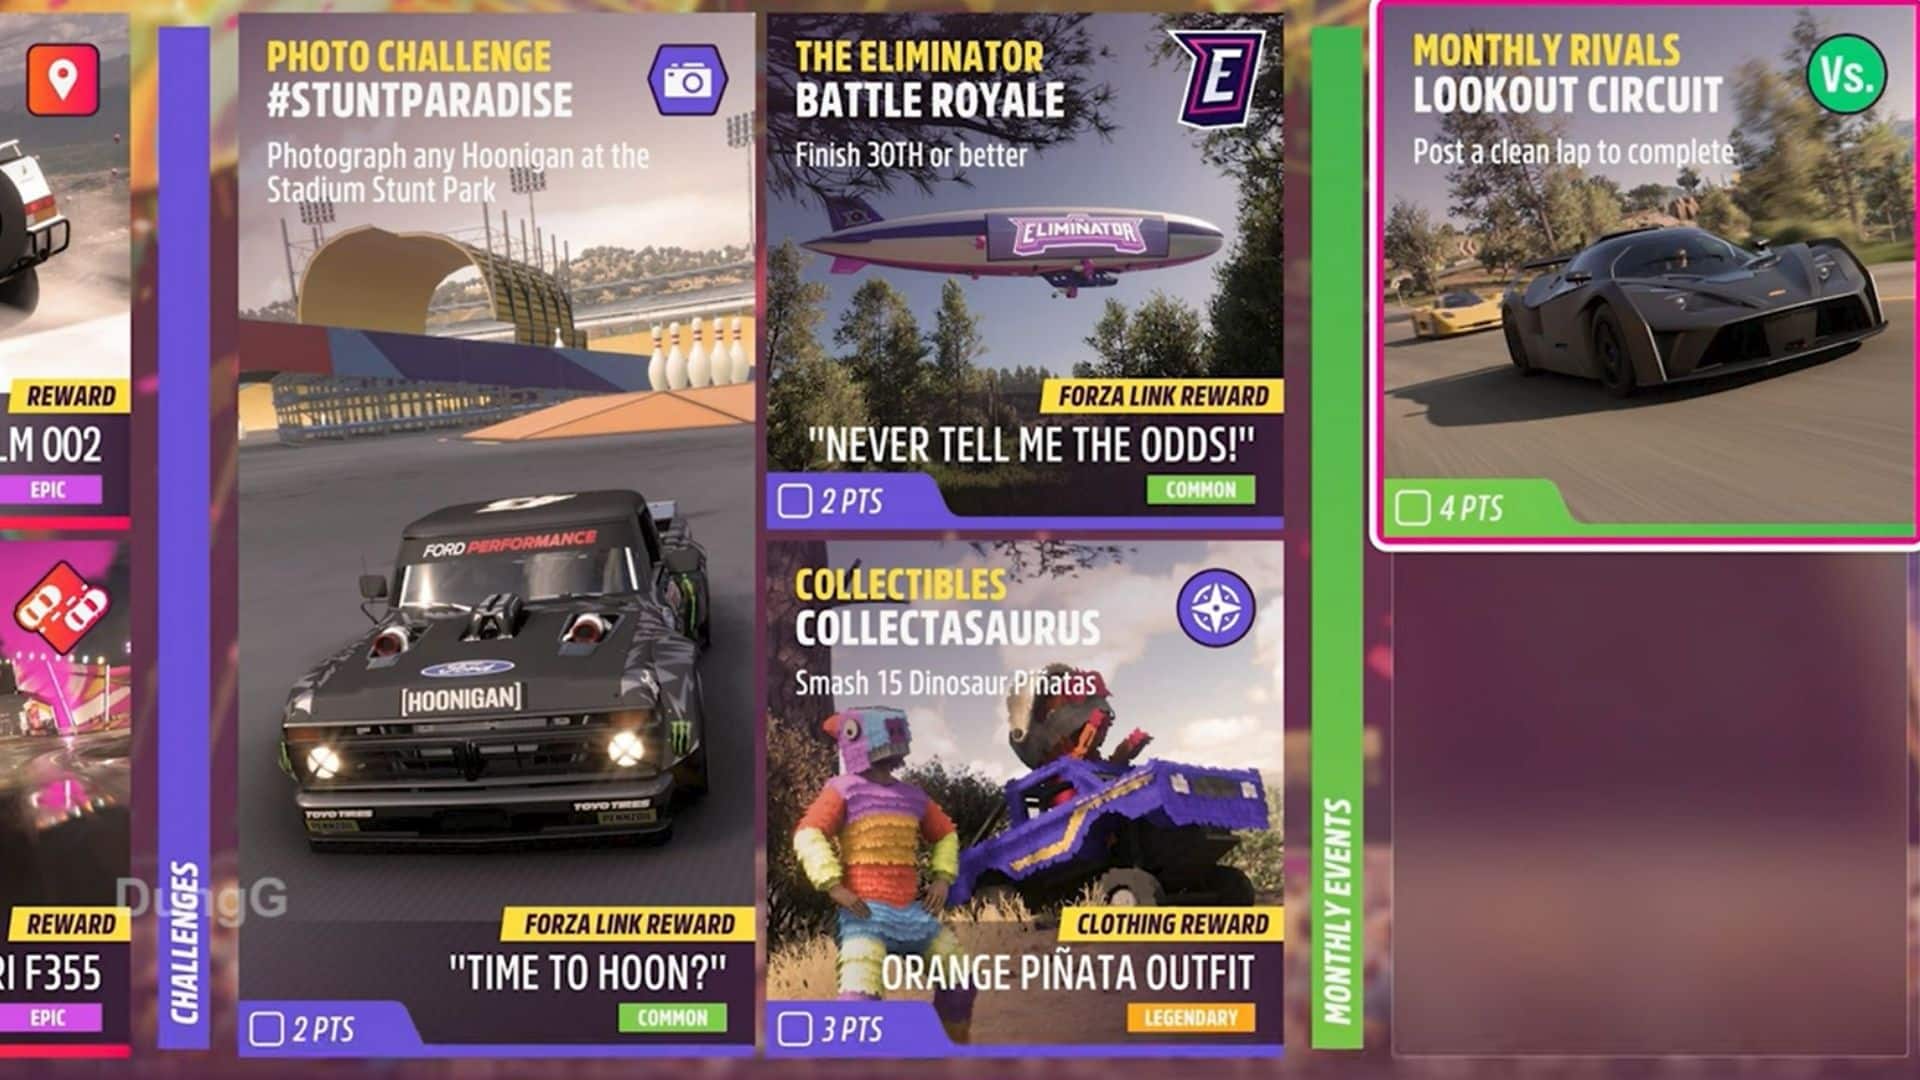 collectasaurus event on events screen in forza horizon 5 menu